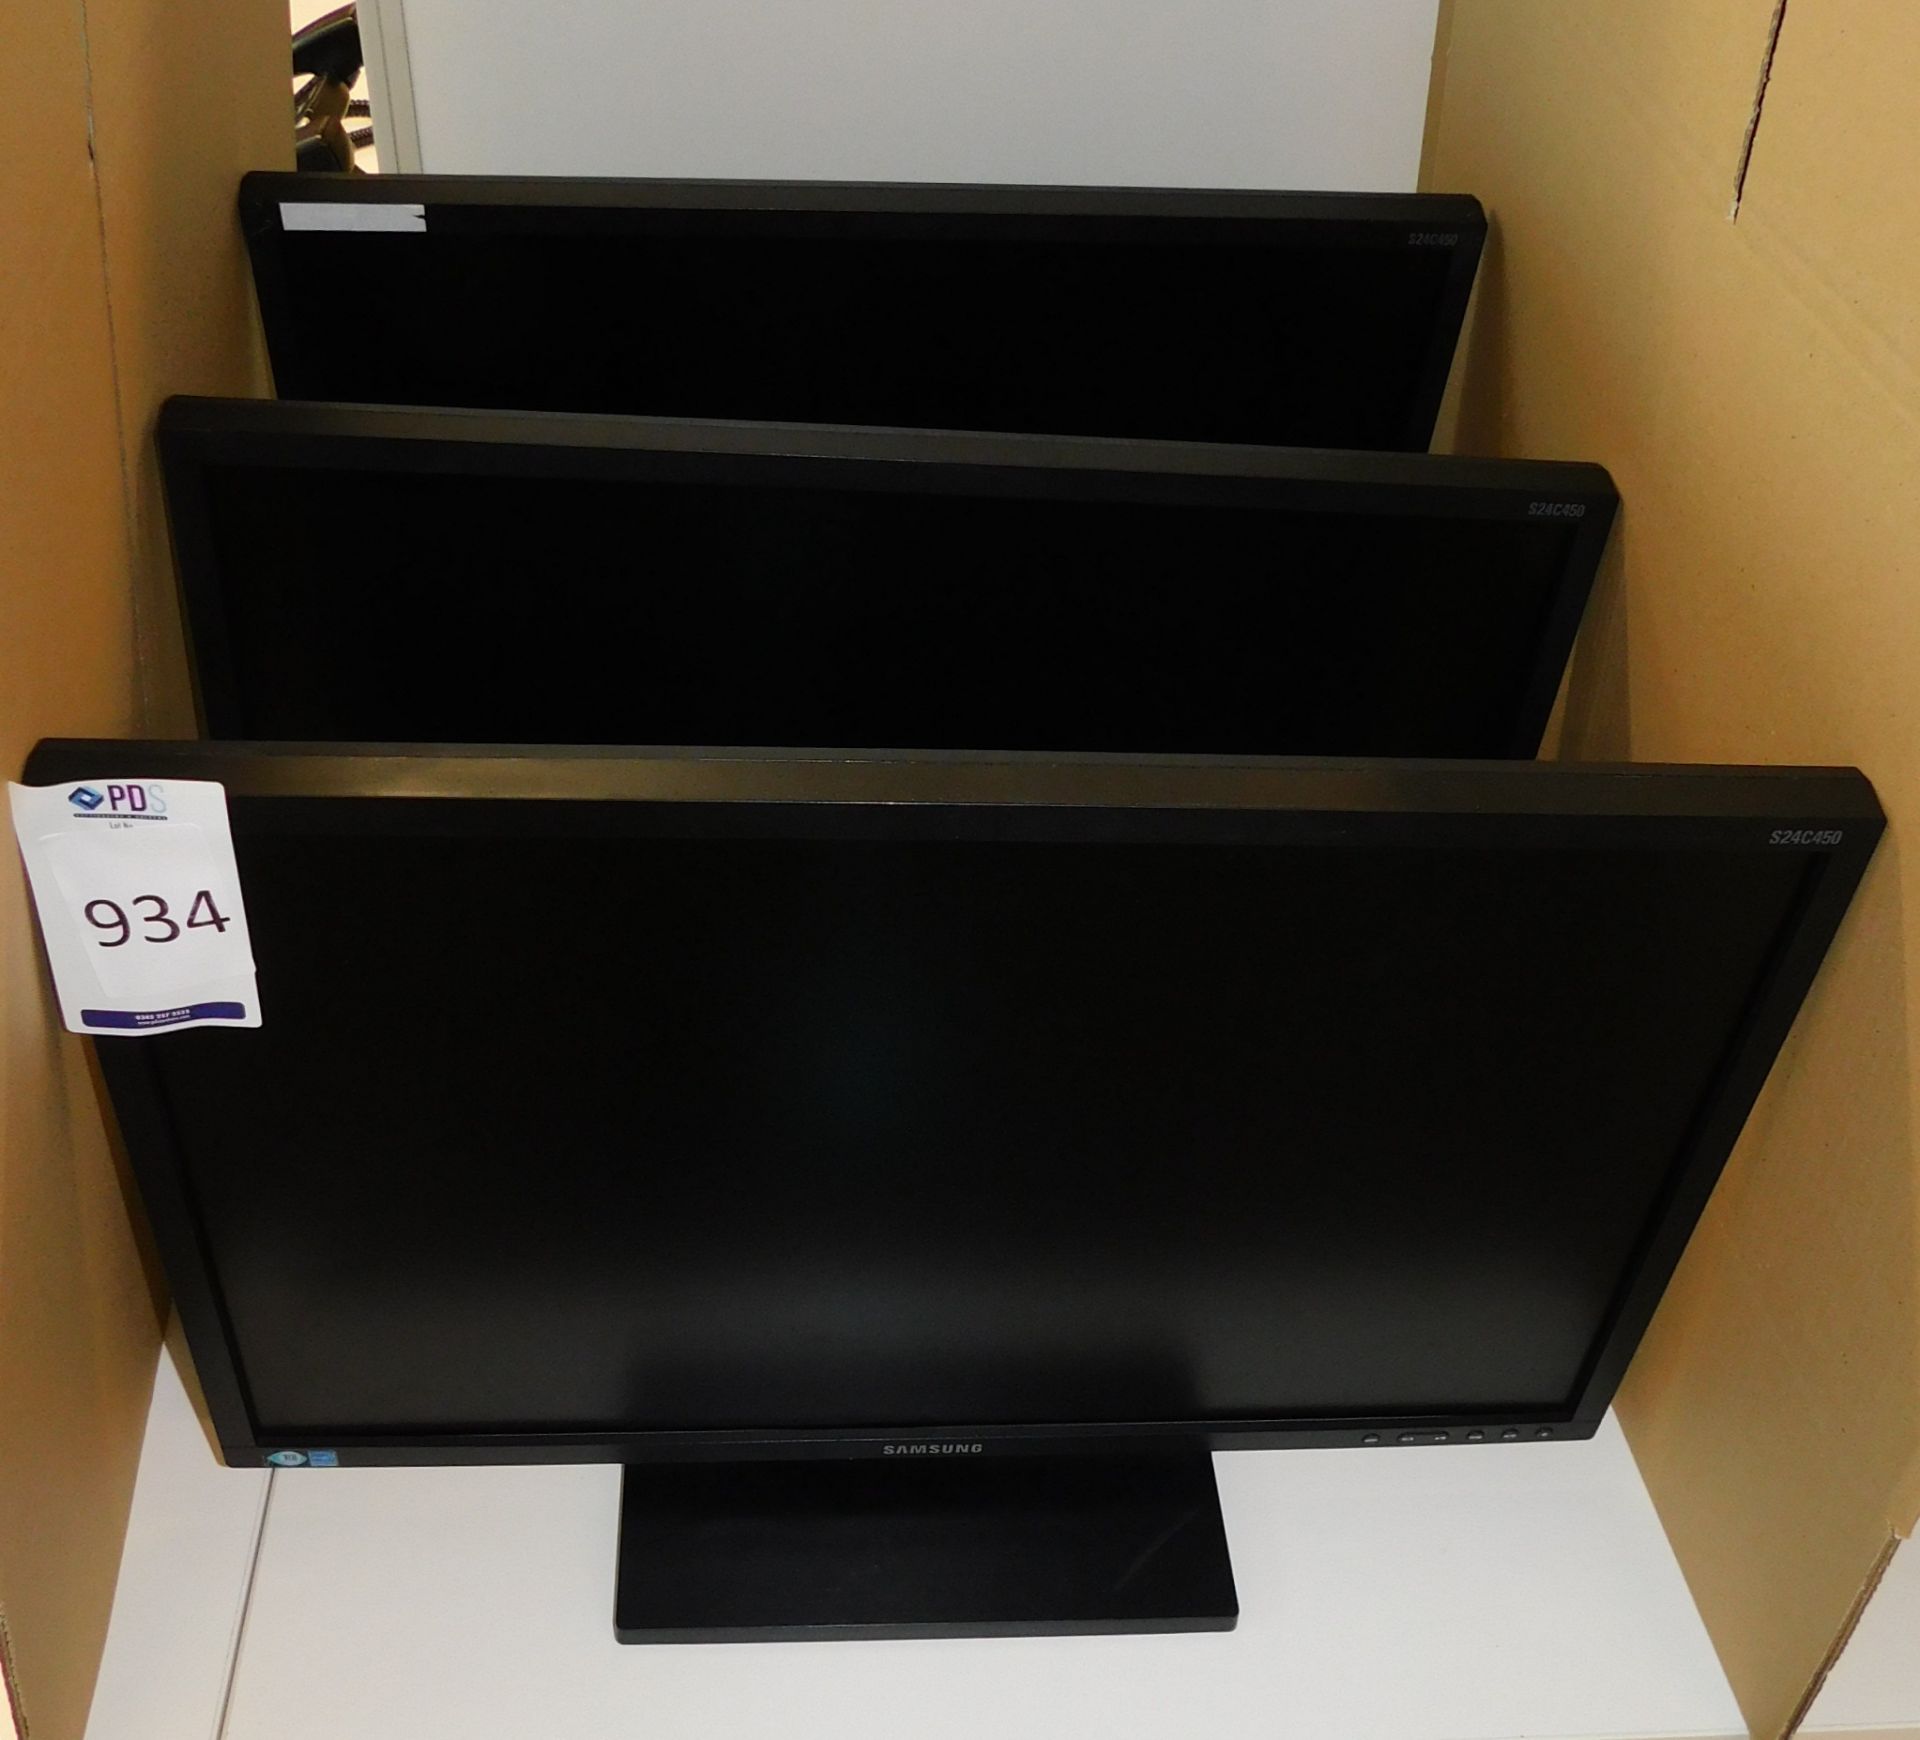 3 Saumsung S24C450 Monitors (Located Manchester – See General Notes for More Details)